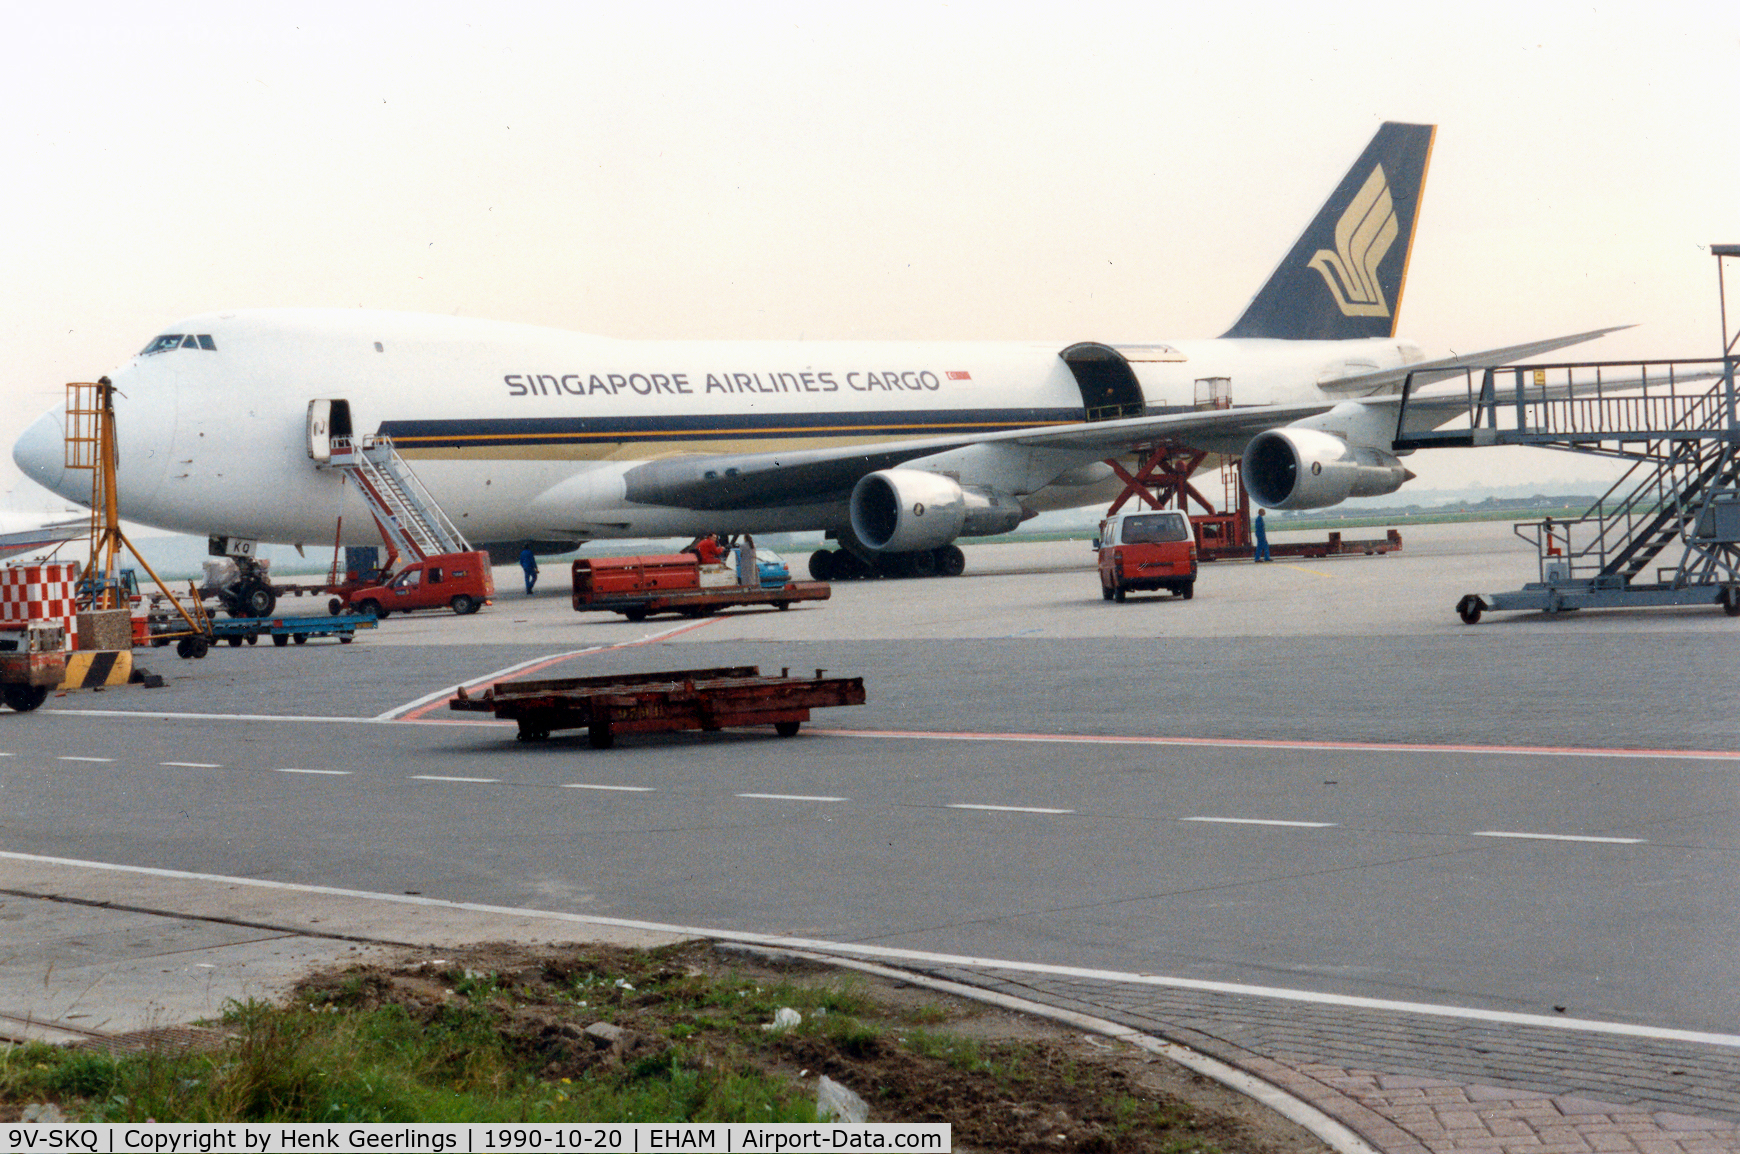 9V-SKQ, 1988 Boeing 747-212F C/N 24177, Singapore Airlines Cargo